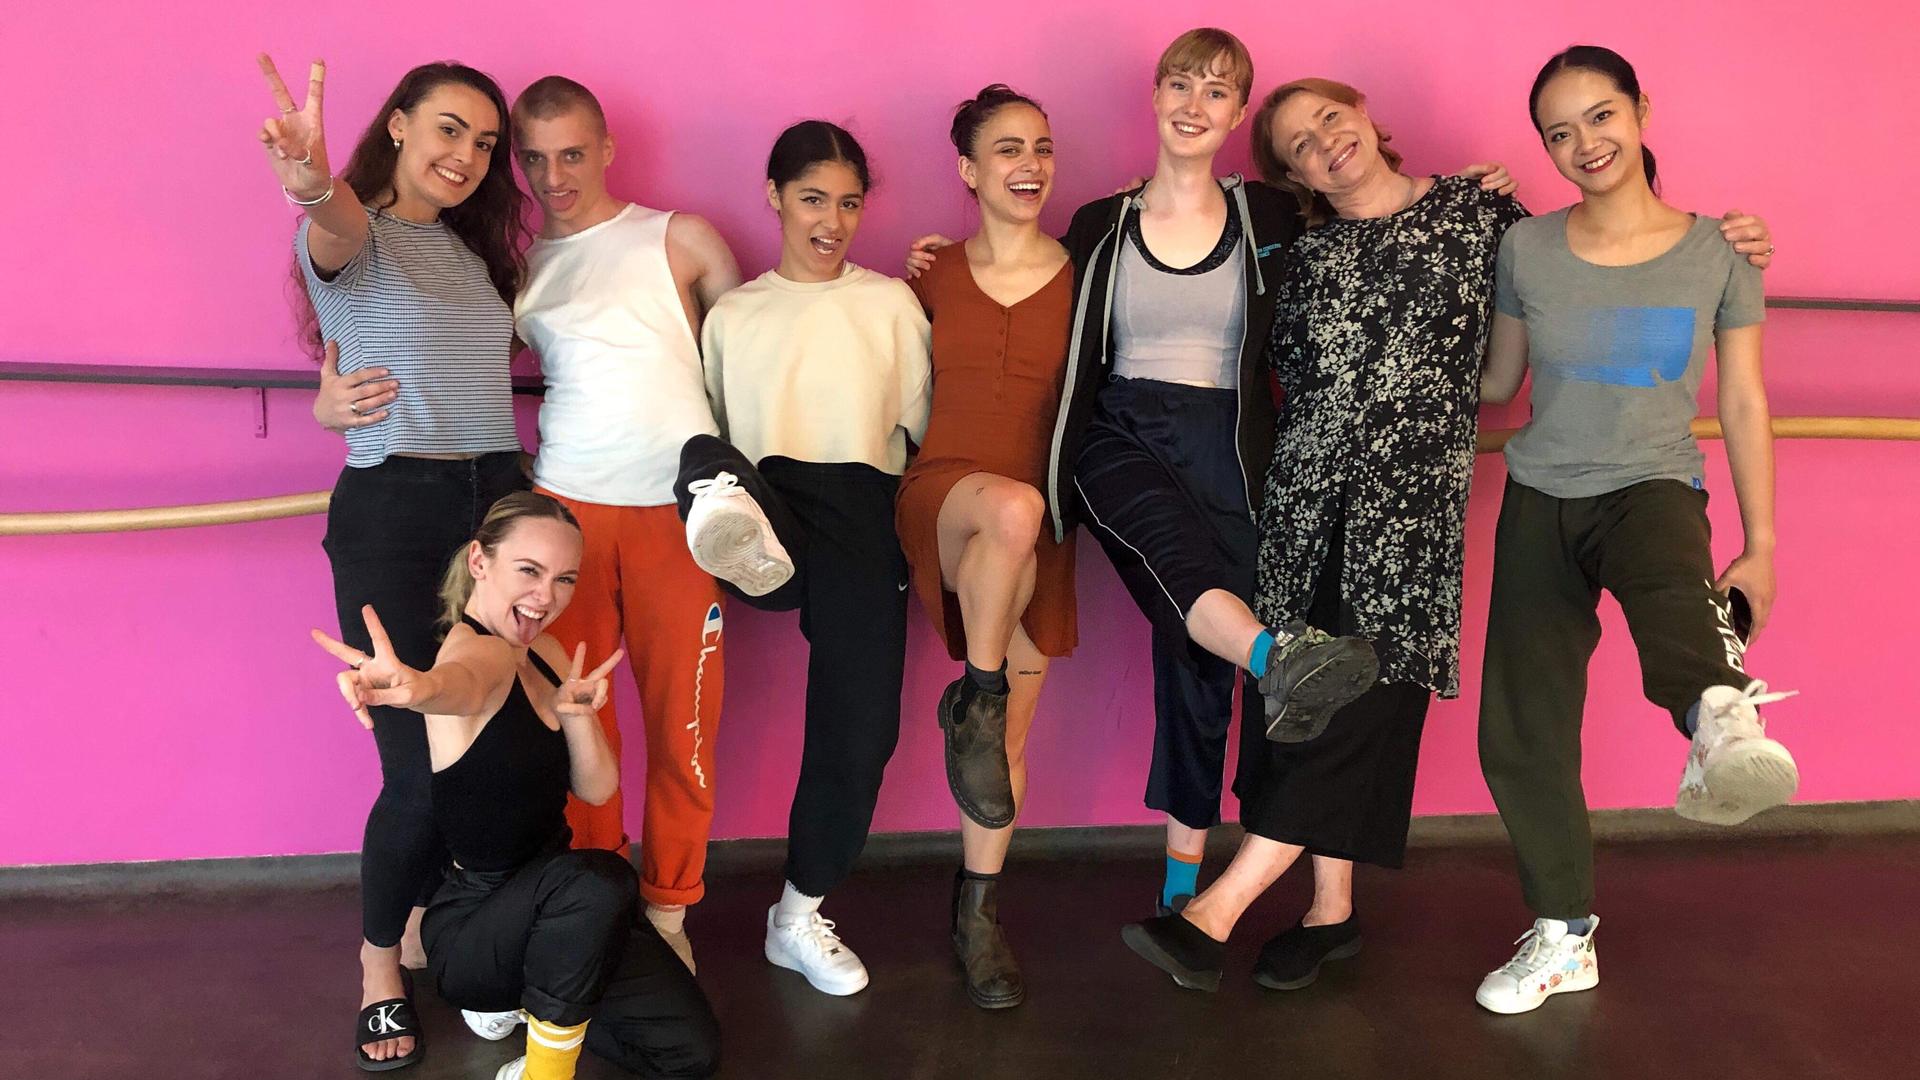 Juilliard dancers pose for a photo with dancers from the Trinity Laban Conservatory of Dance in London--names unknown--in the dance studio. They are wearing street clothes and behind them is a distinctive pink wall.